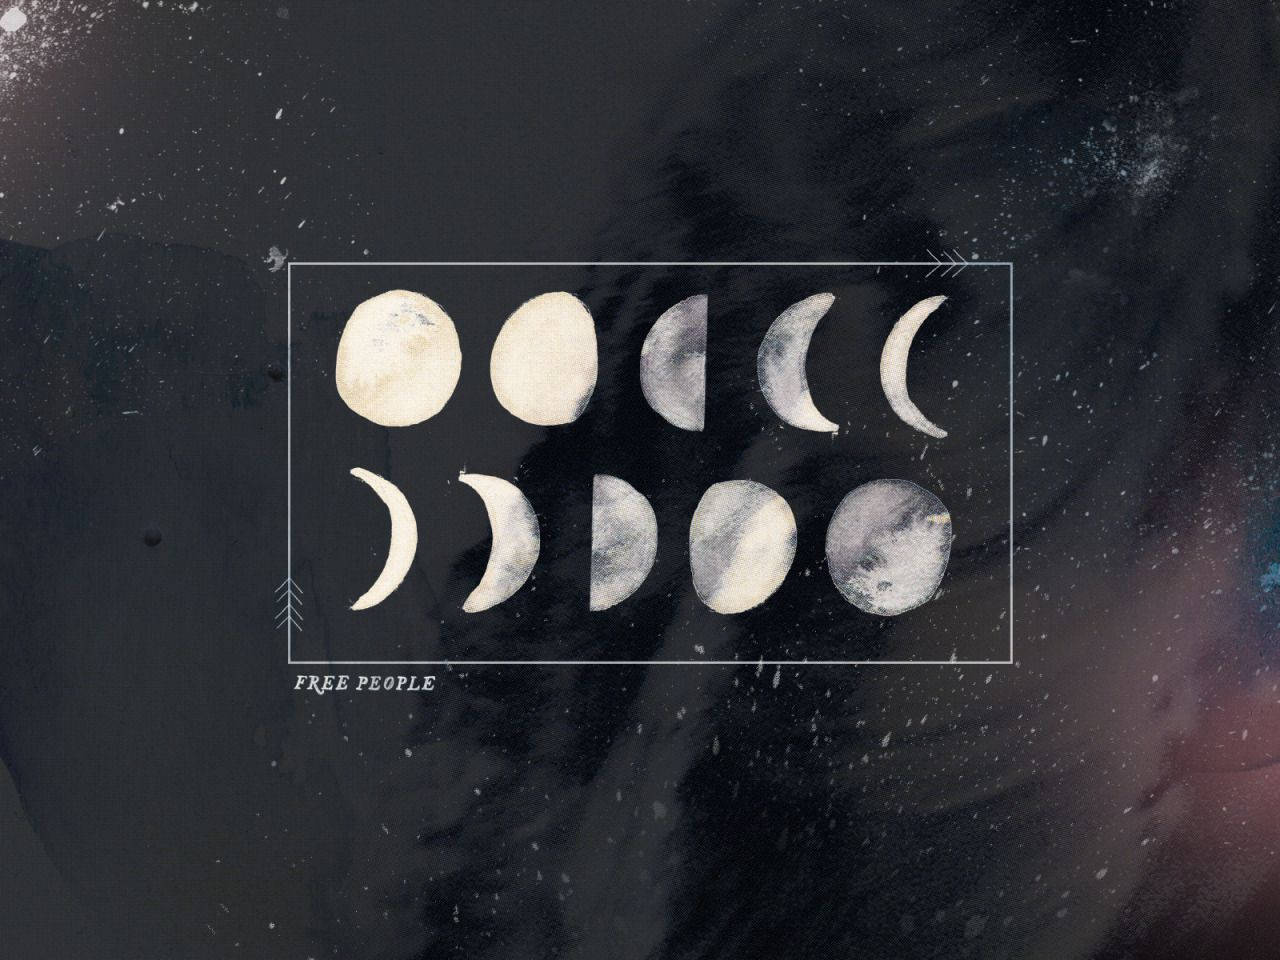 Abstract Art Of The Moon Phases Wallpaper